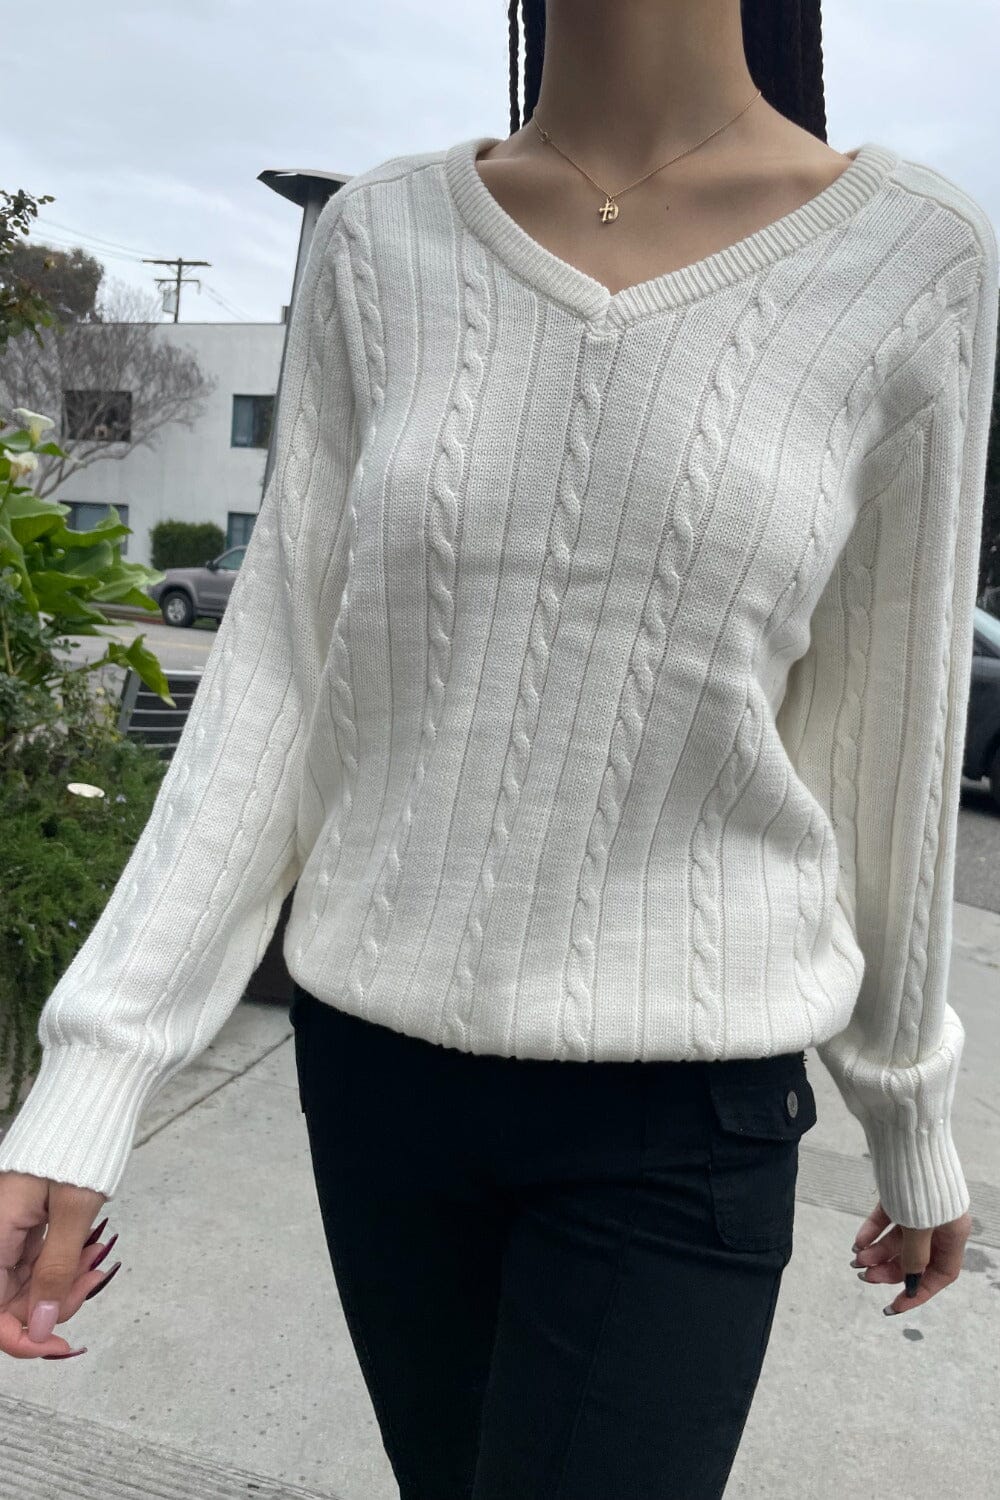 Cotton Cable-Knit Sweater